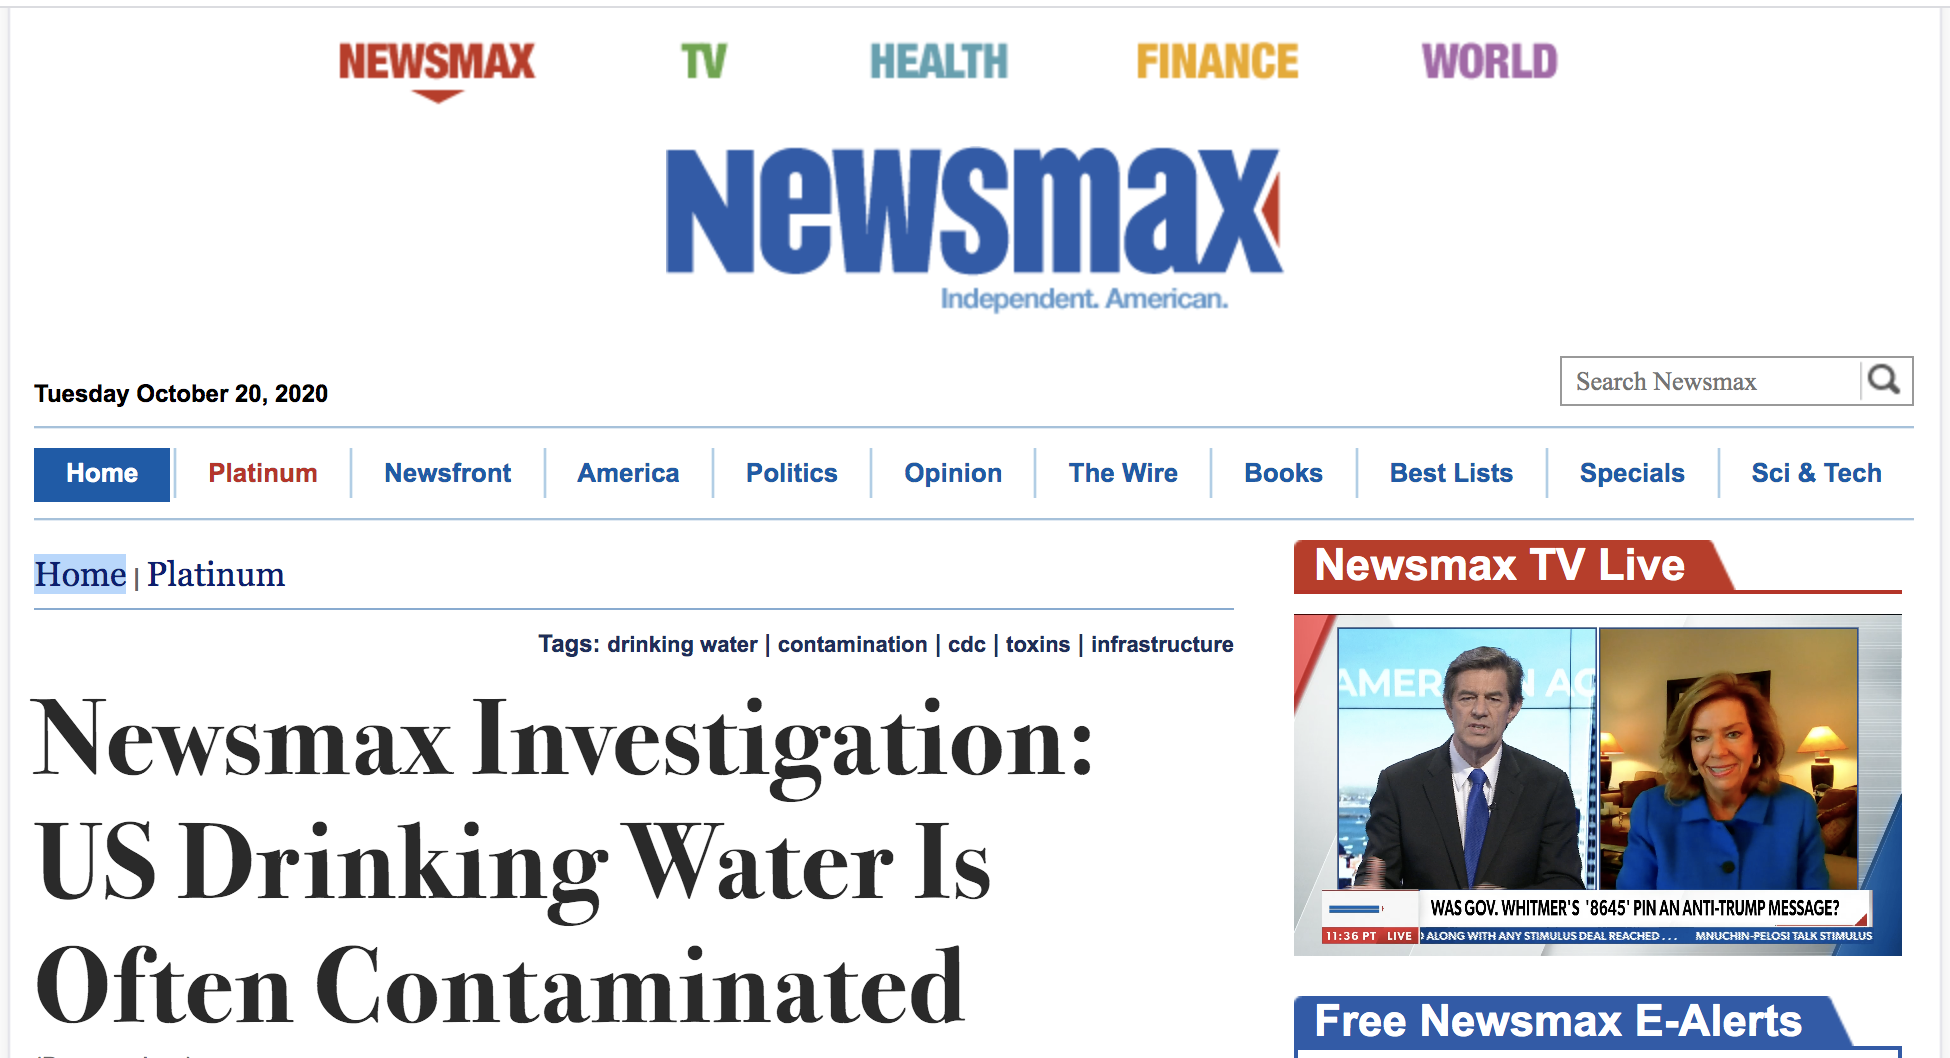 Newsmax' investigative article on drinking water